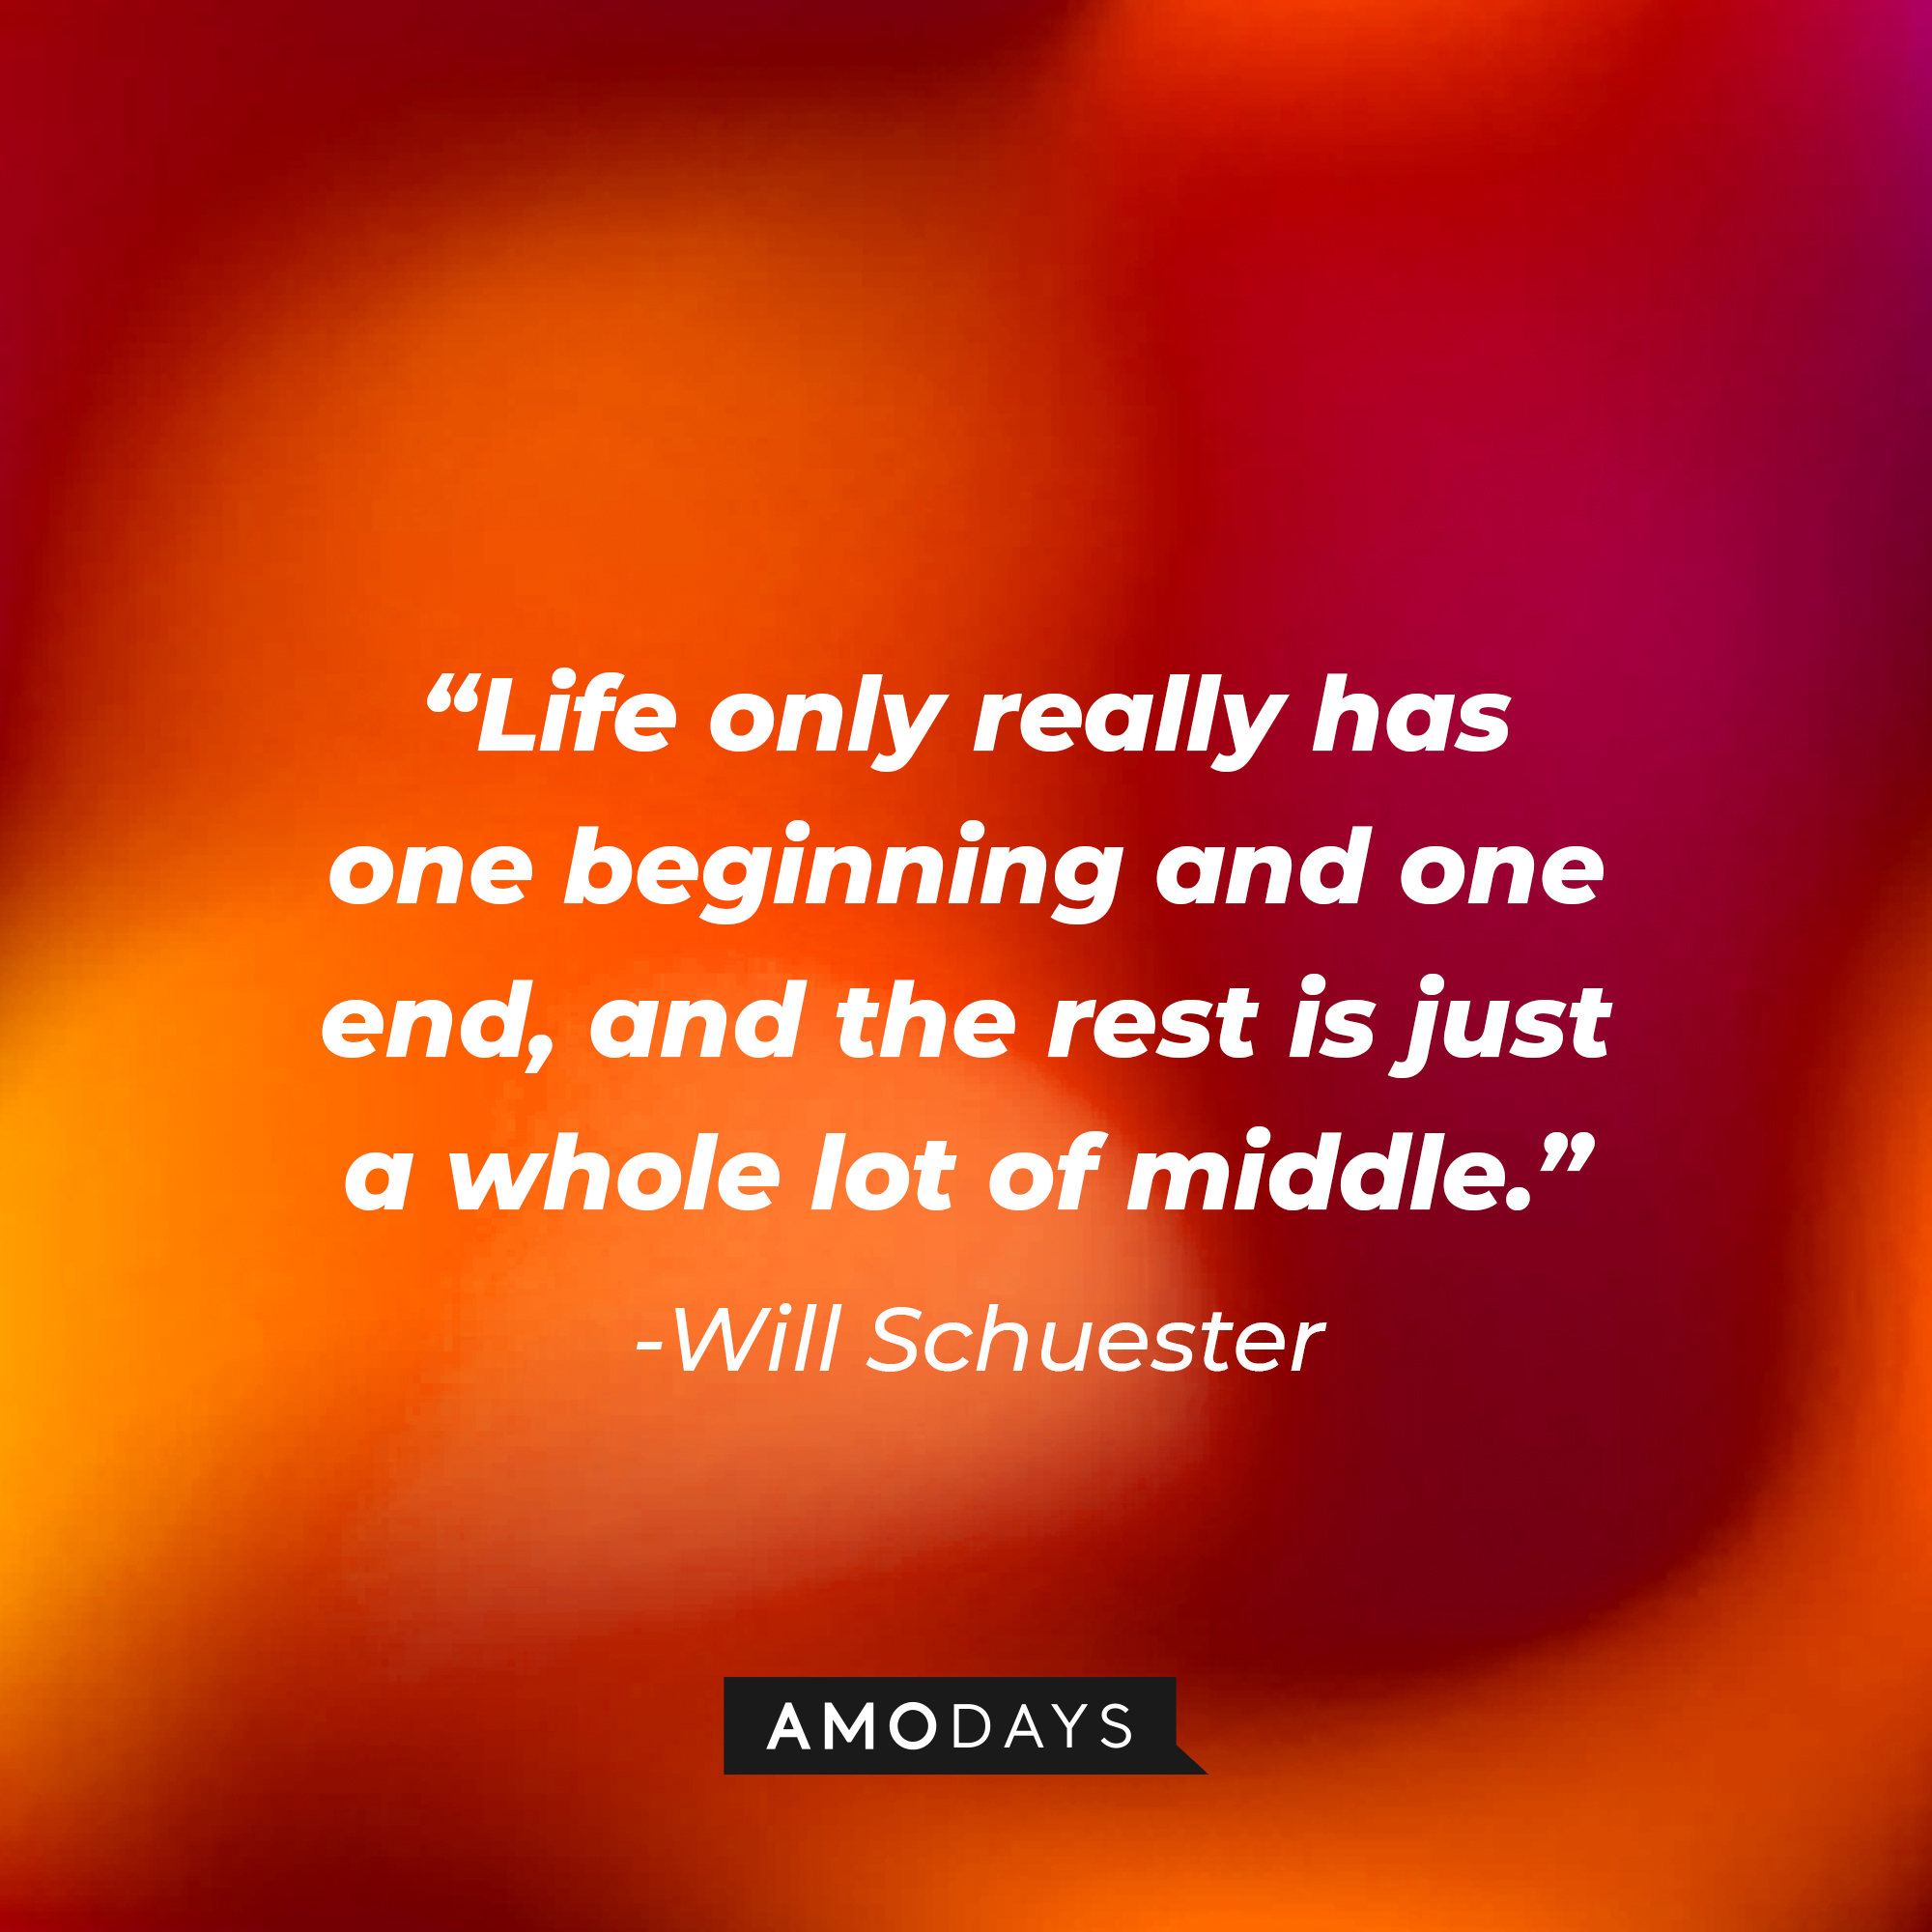 Will Schuester’s quote from “Glee”: “Life only really has one beginning and one end, and the rest is just a whole lot of middle.” | Image: AmoDays